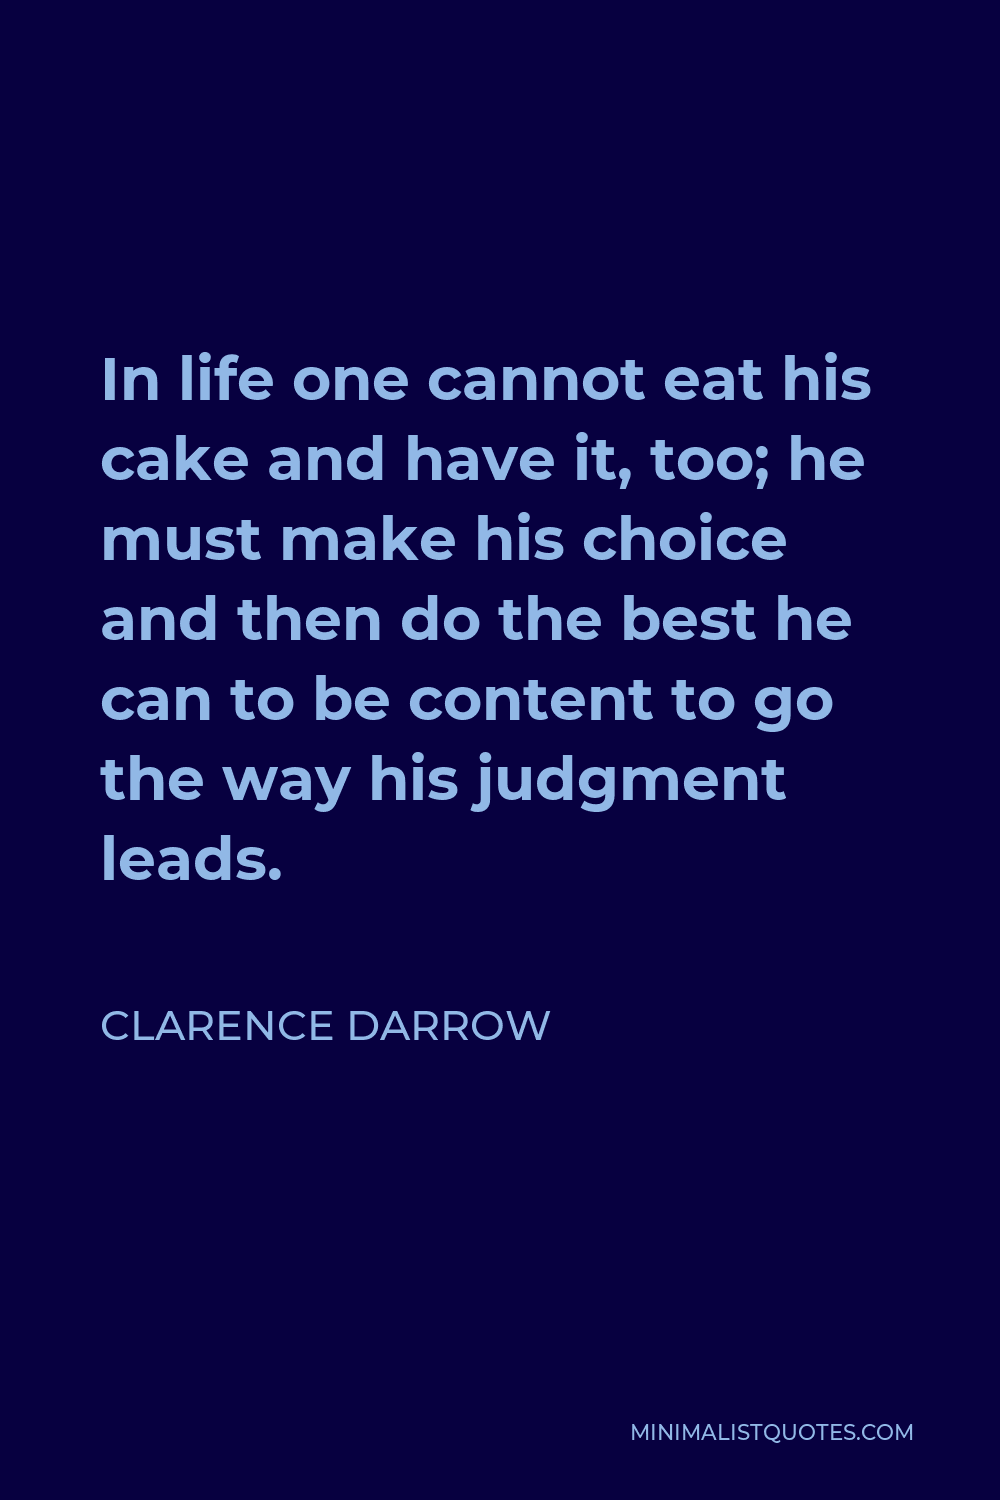 Clarence Darrow Quote - In life one cannot eat his cake and have it, too; he must make his choice and then do the best he can to be content to go the way his judgment leads.